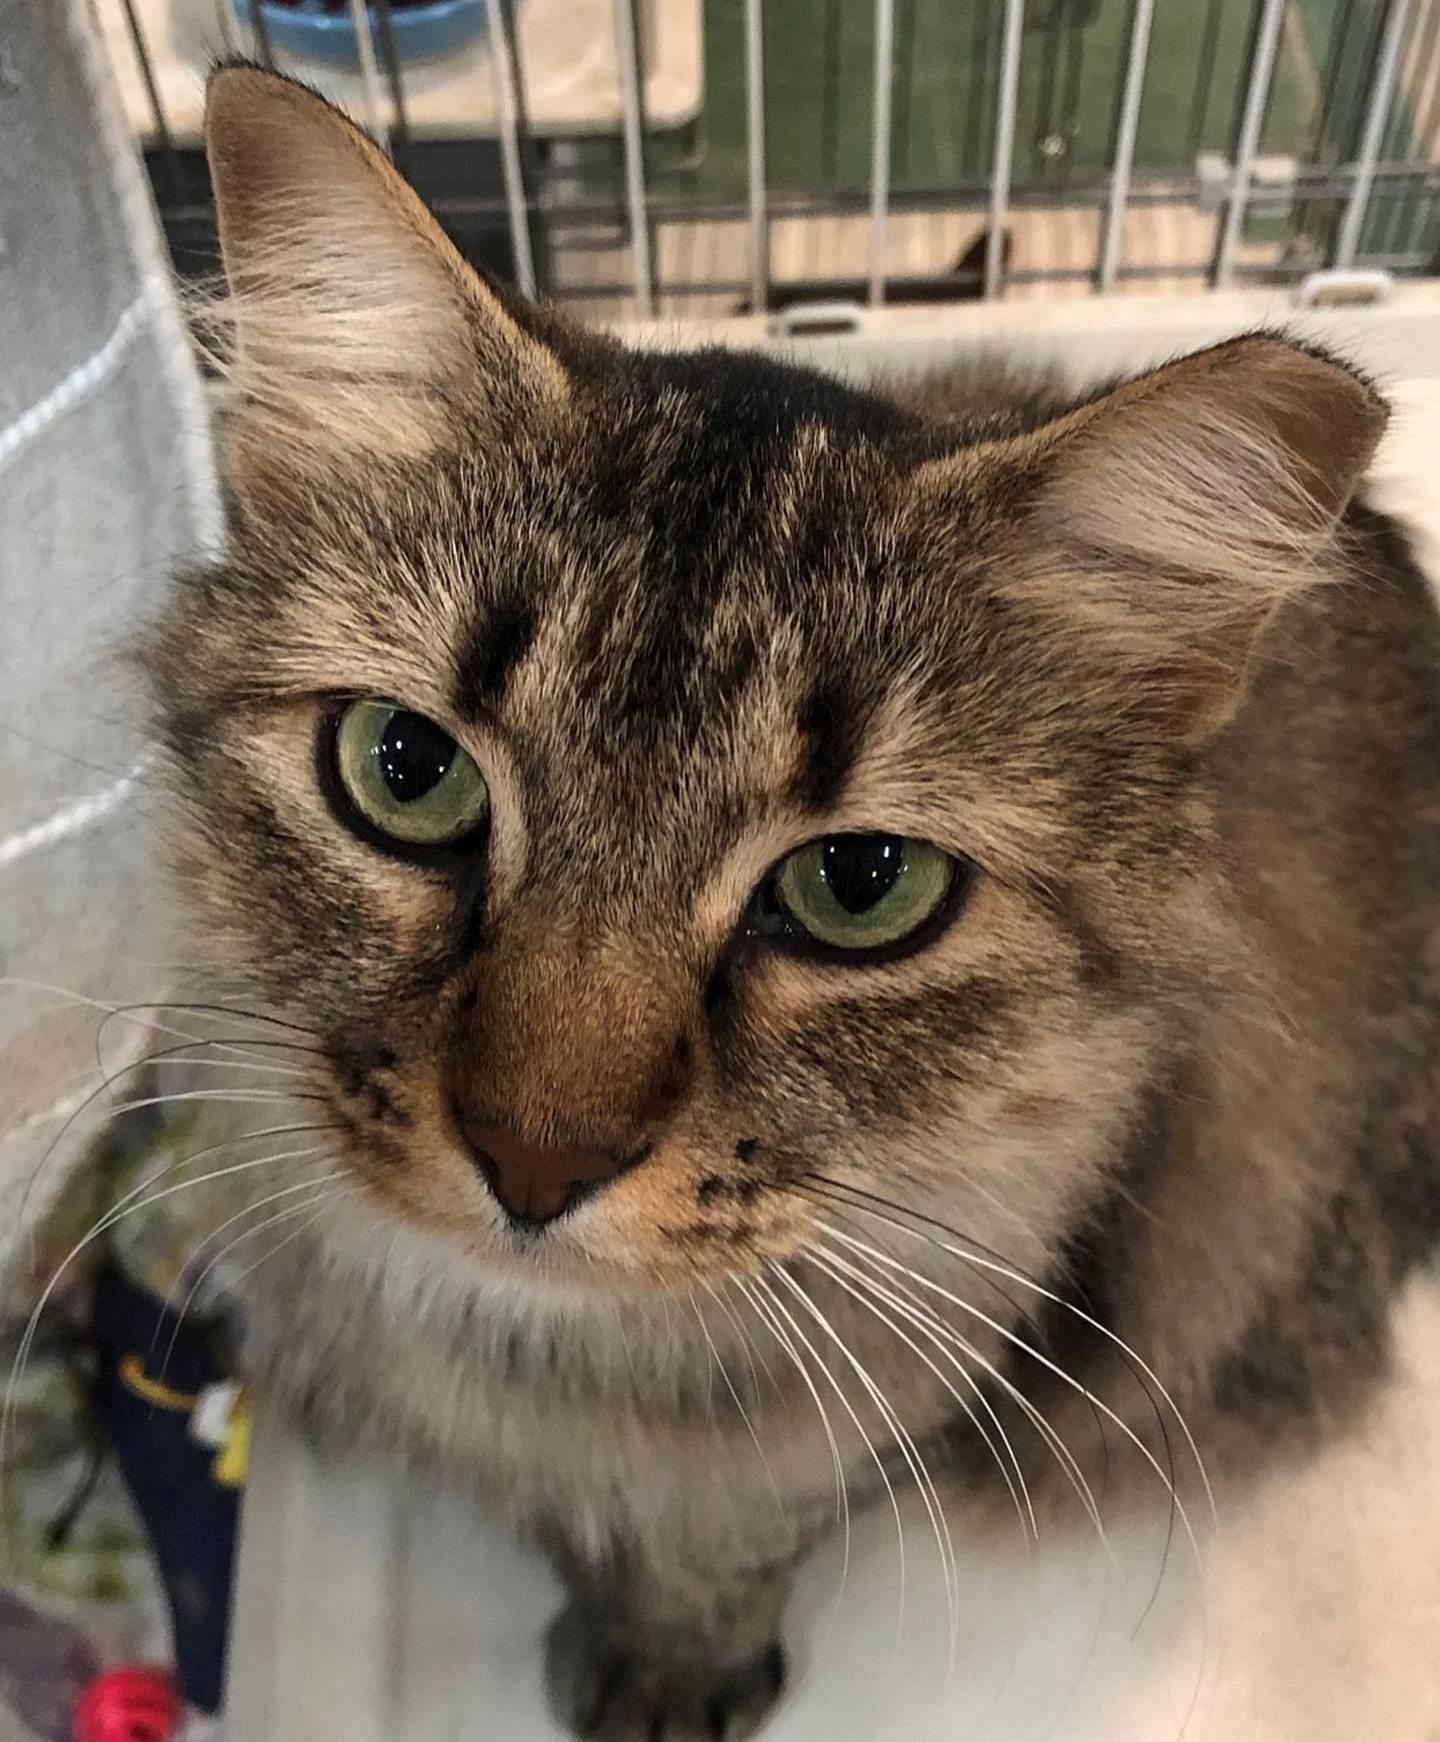 Camille is a 4-year-old female tabby.  She is very social and friendly. She likes to be held, enjoys pets and gives kisses. She is FIV positive but gets along with other cats. To meet Camille, email Catadoptions@nawsus.org. Visit nawsus.org.